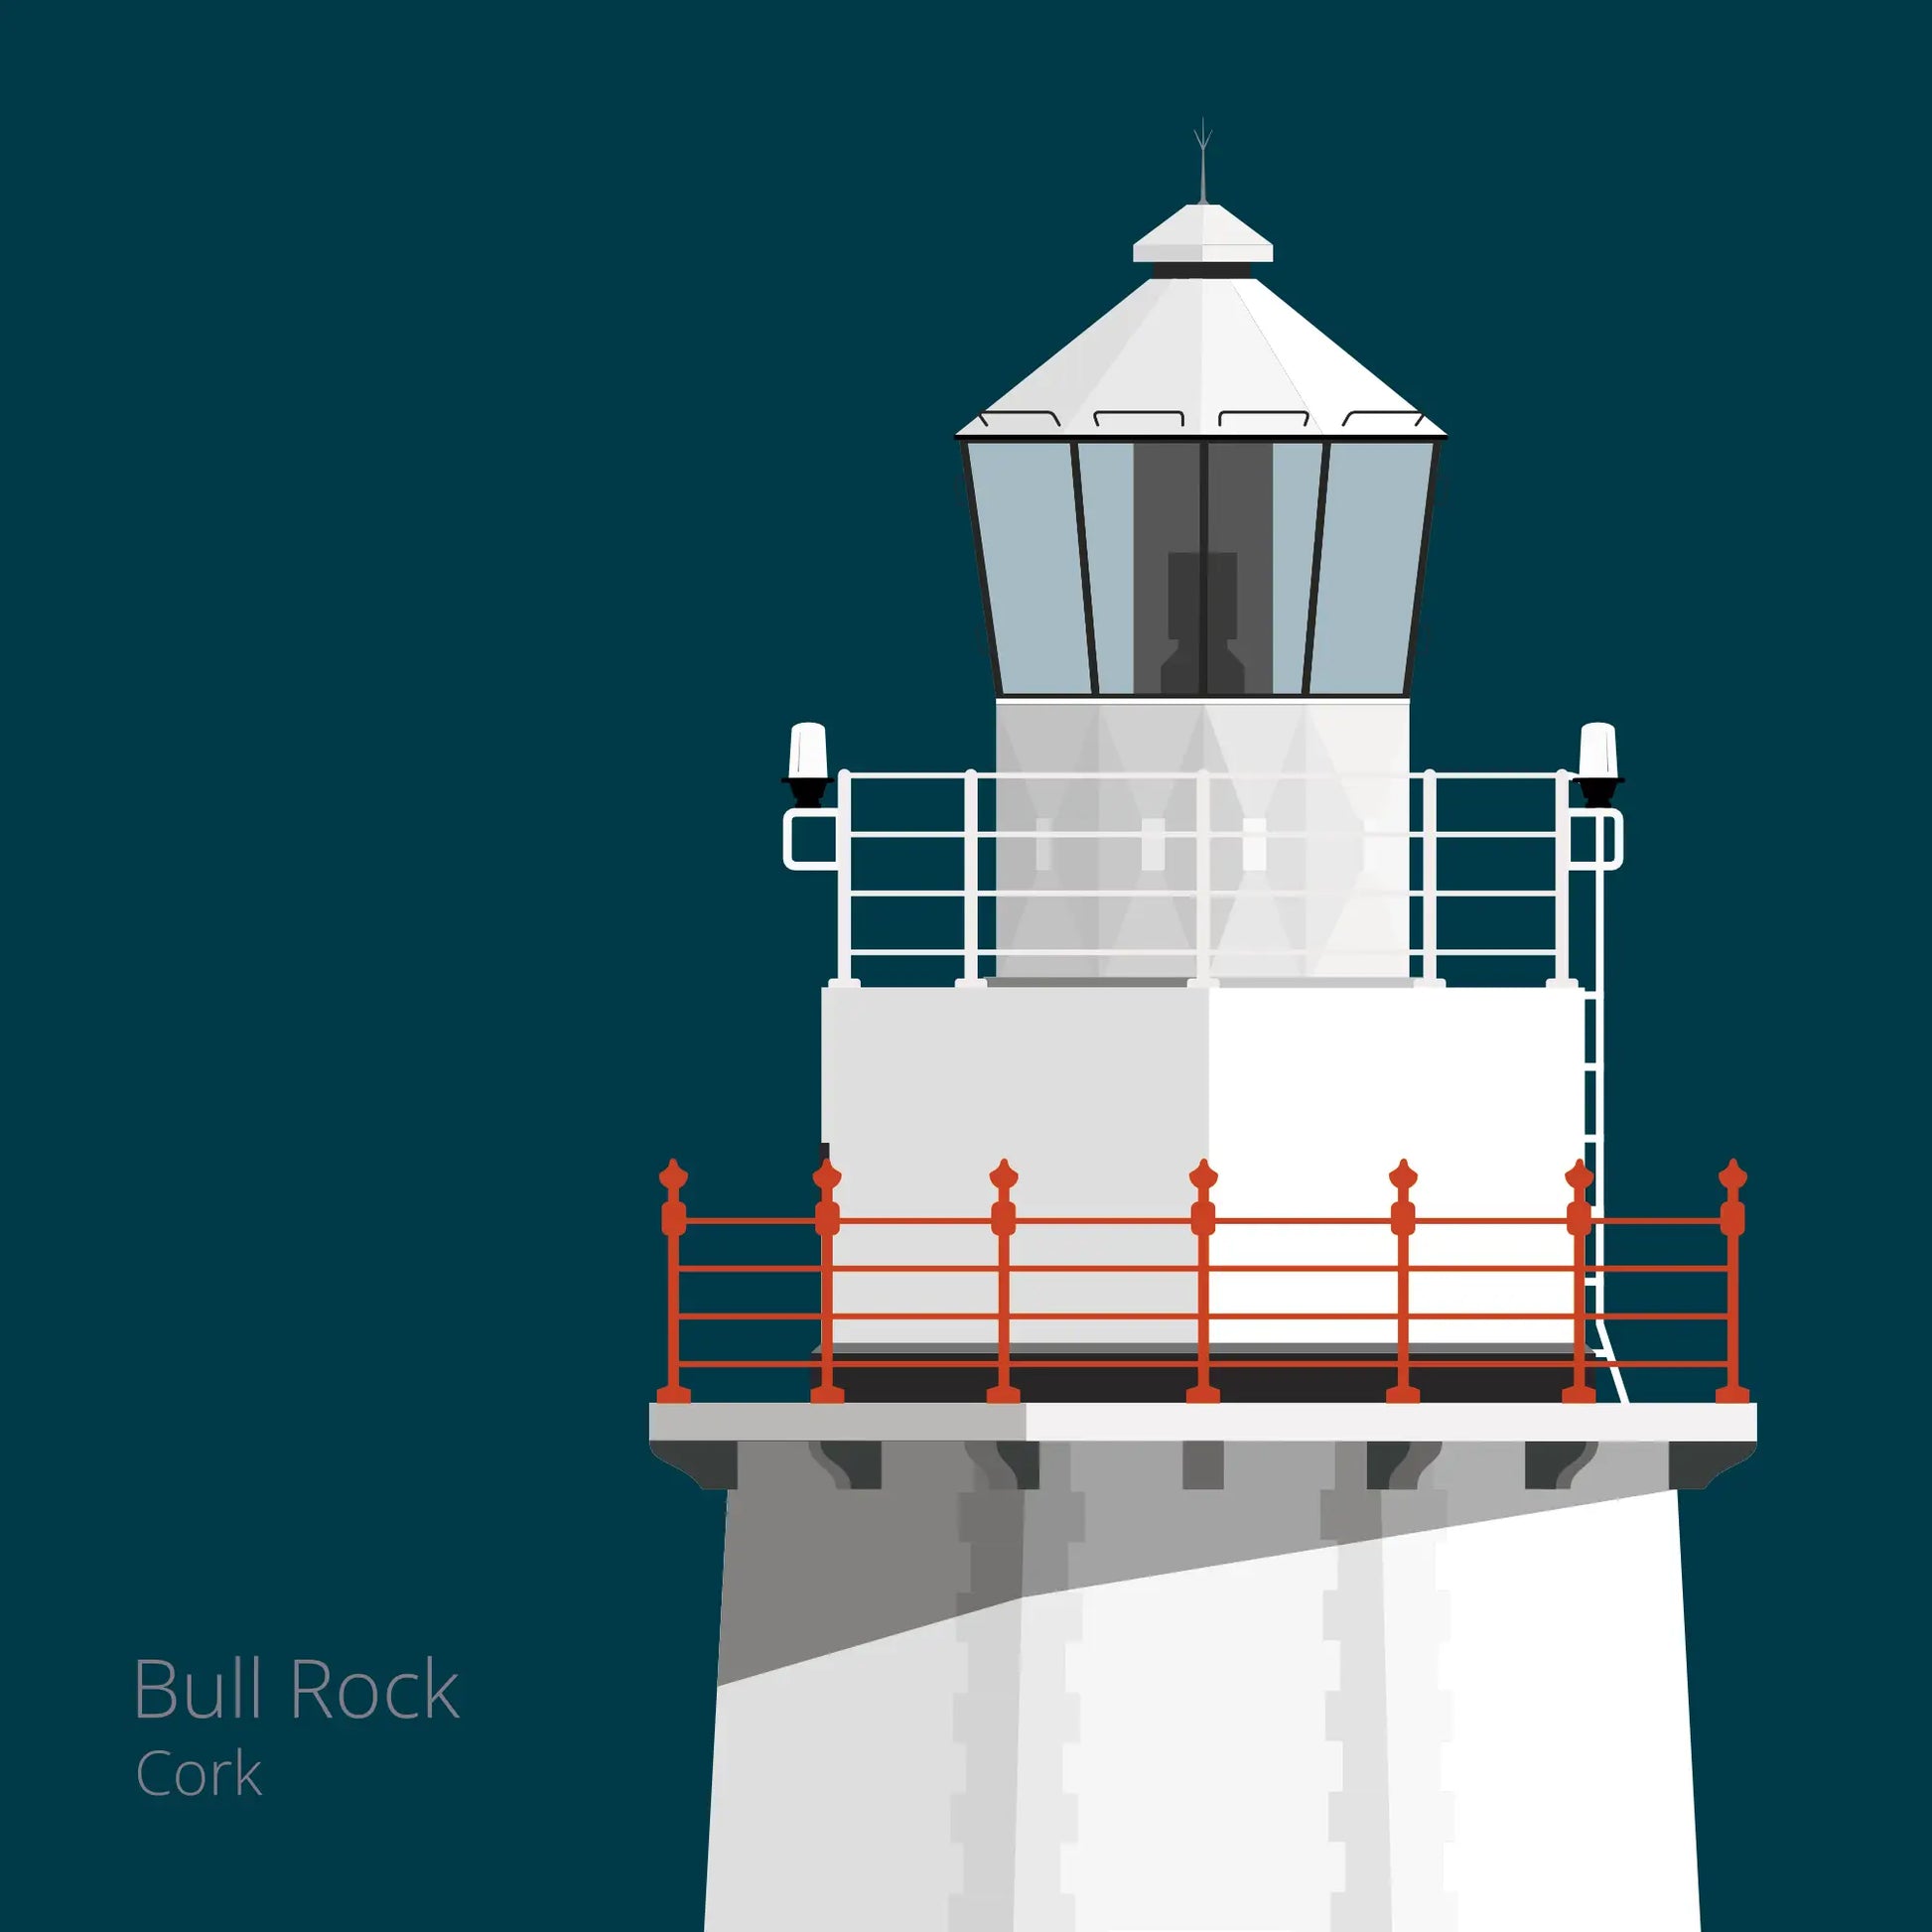 Illustration of Bull Rock lighthouse on a midnight blue background